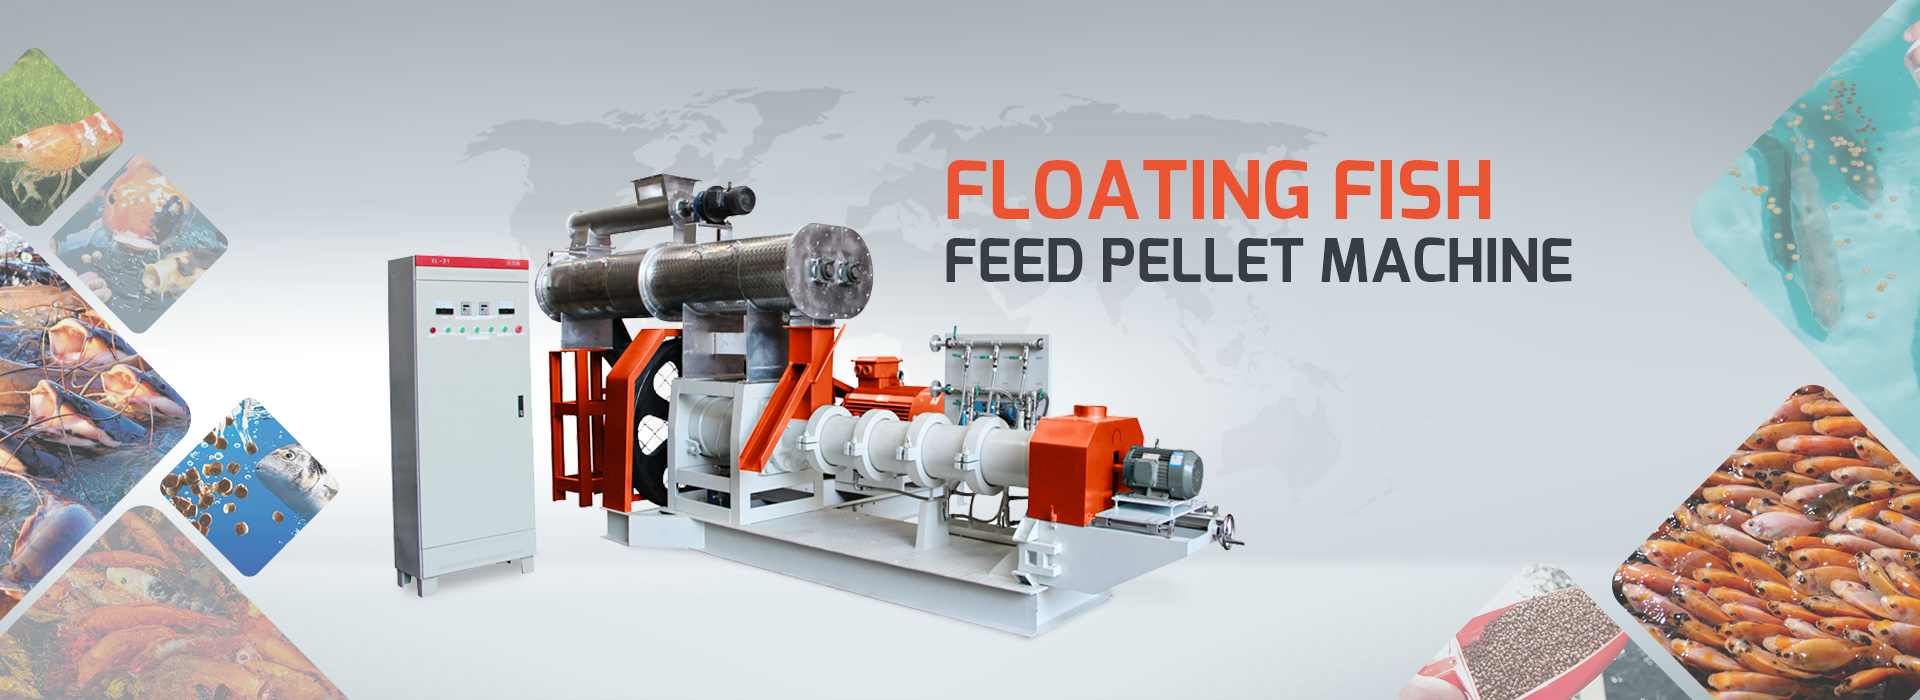 Floating Fish Feed Pellet Pachine